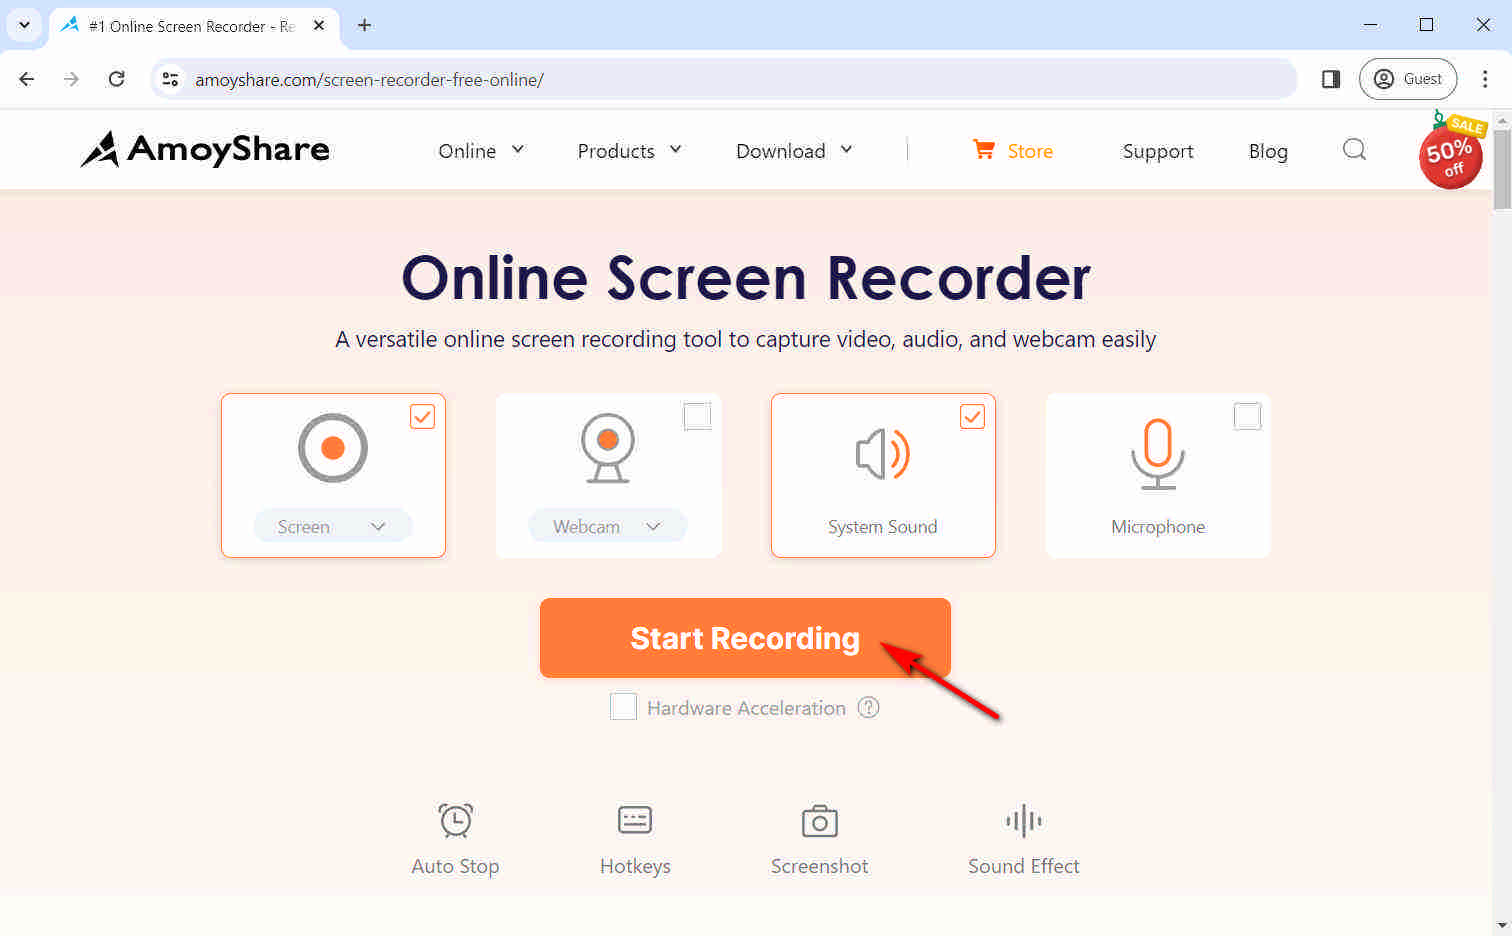 Click start recording to record GoToMeeting